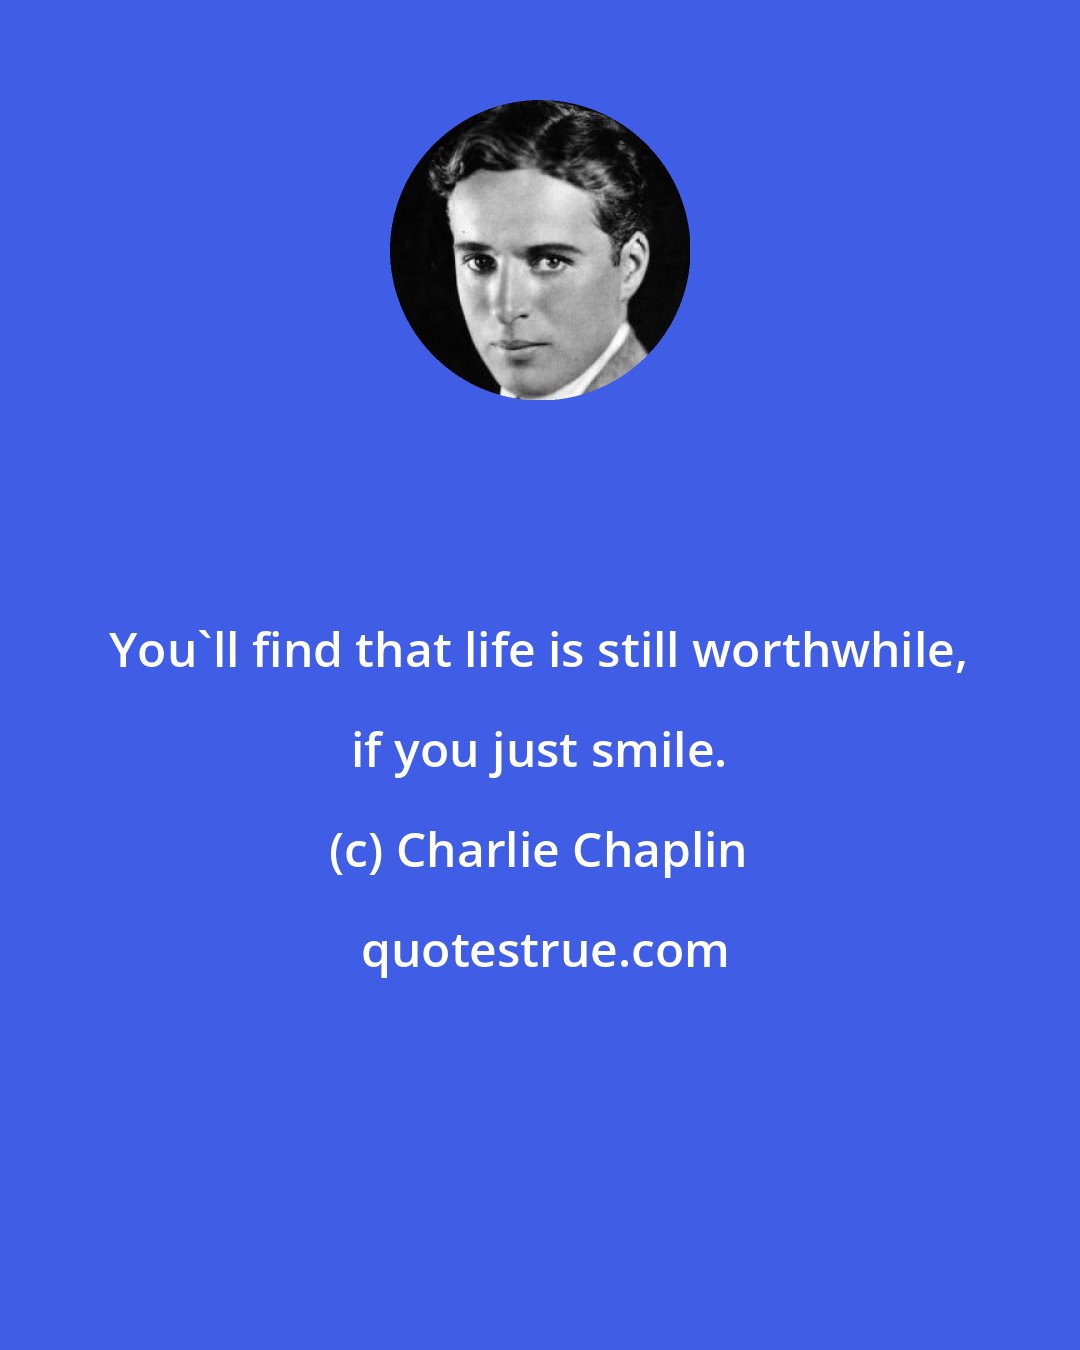 Charlie Chaplin: You'll find that life is still worthwhile, if you just smile.